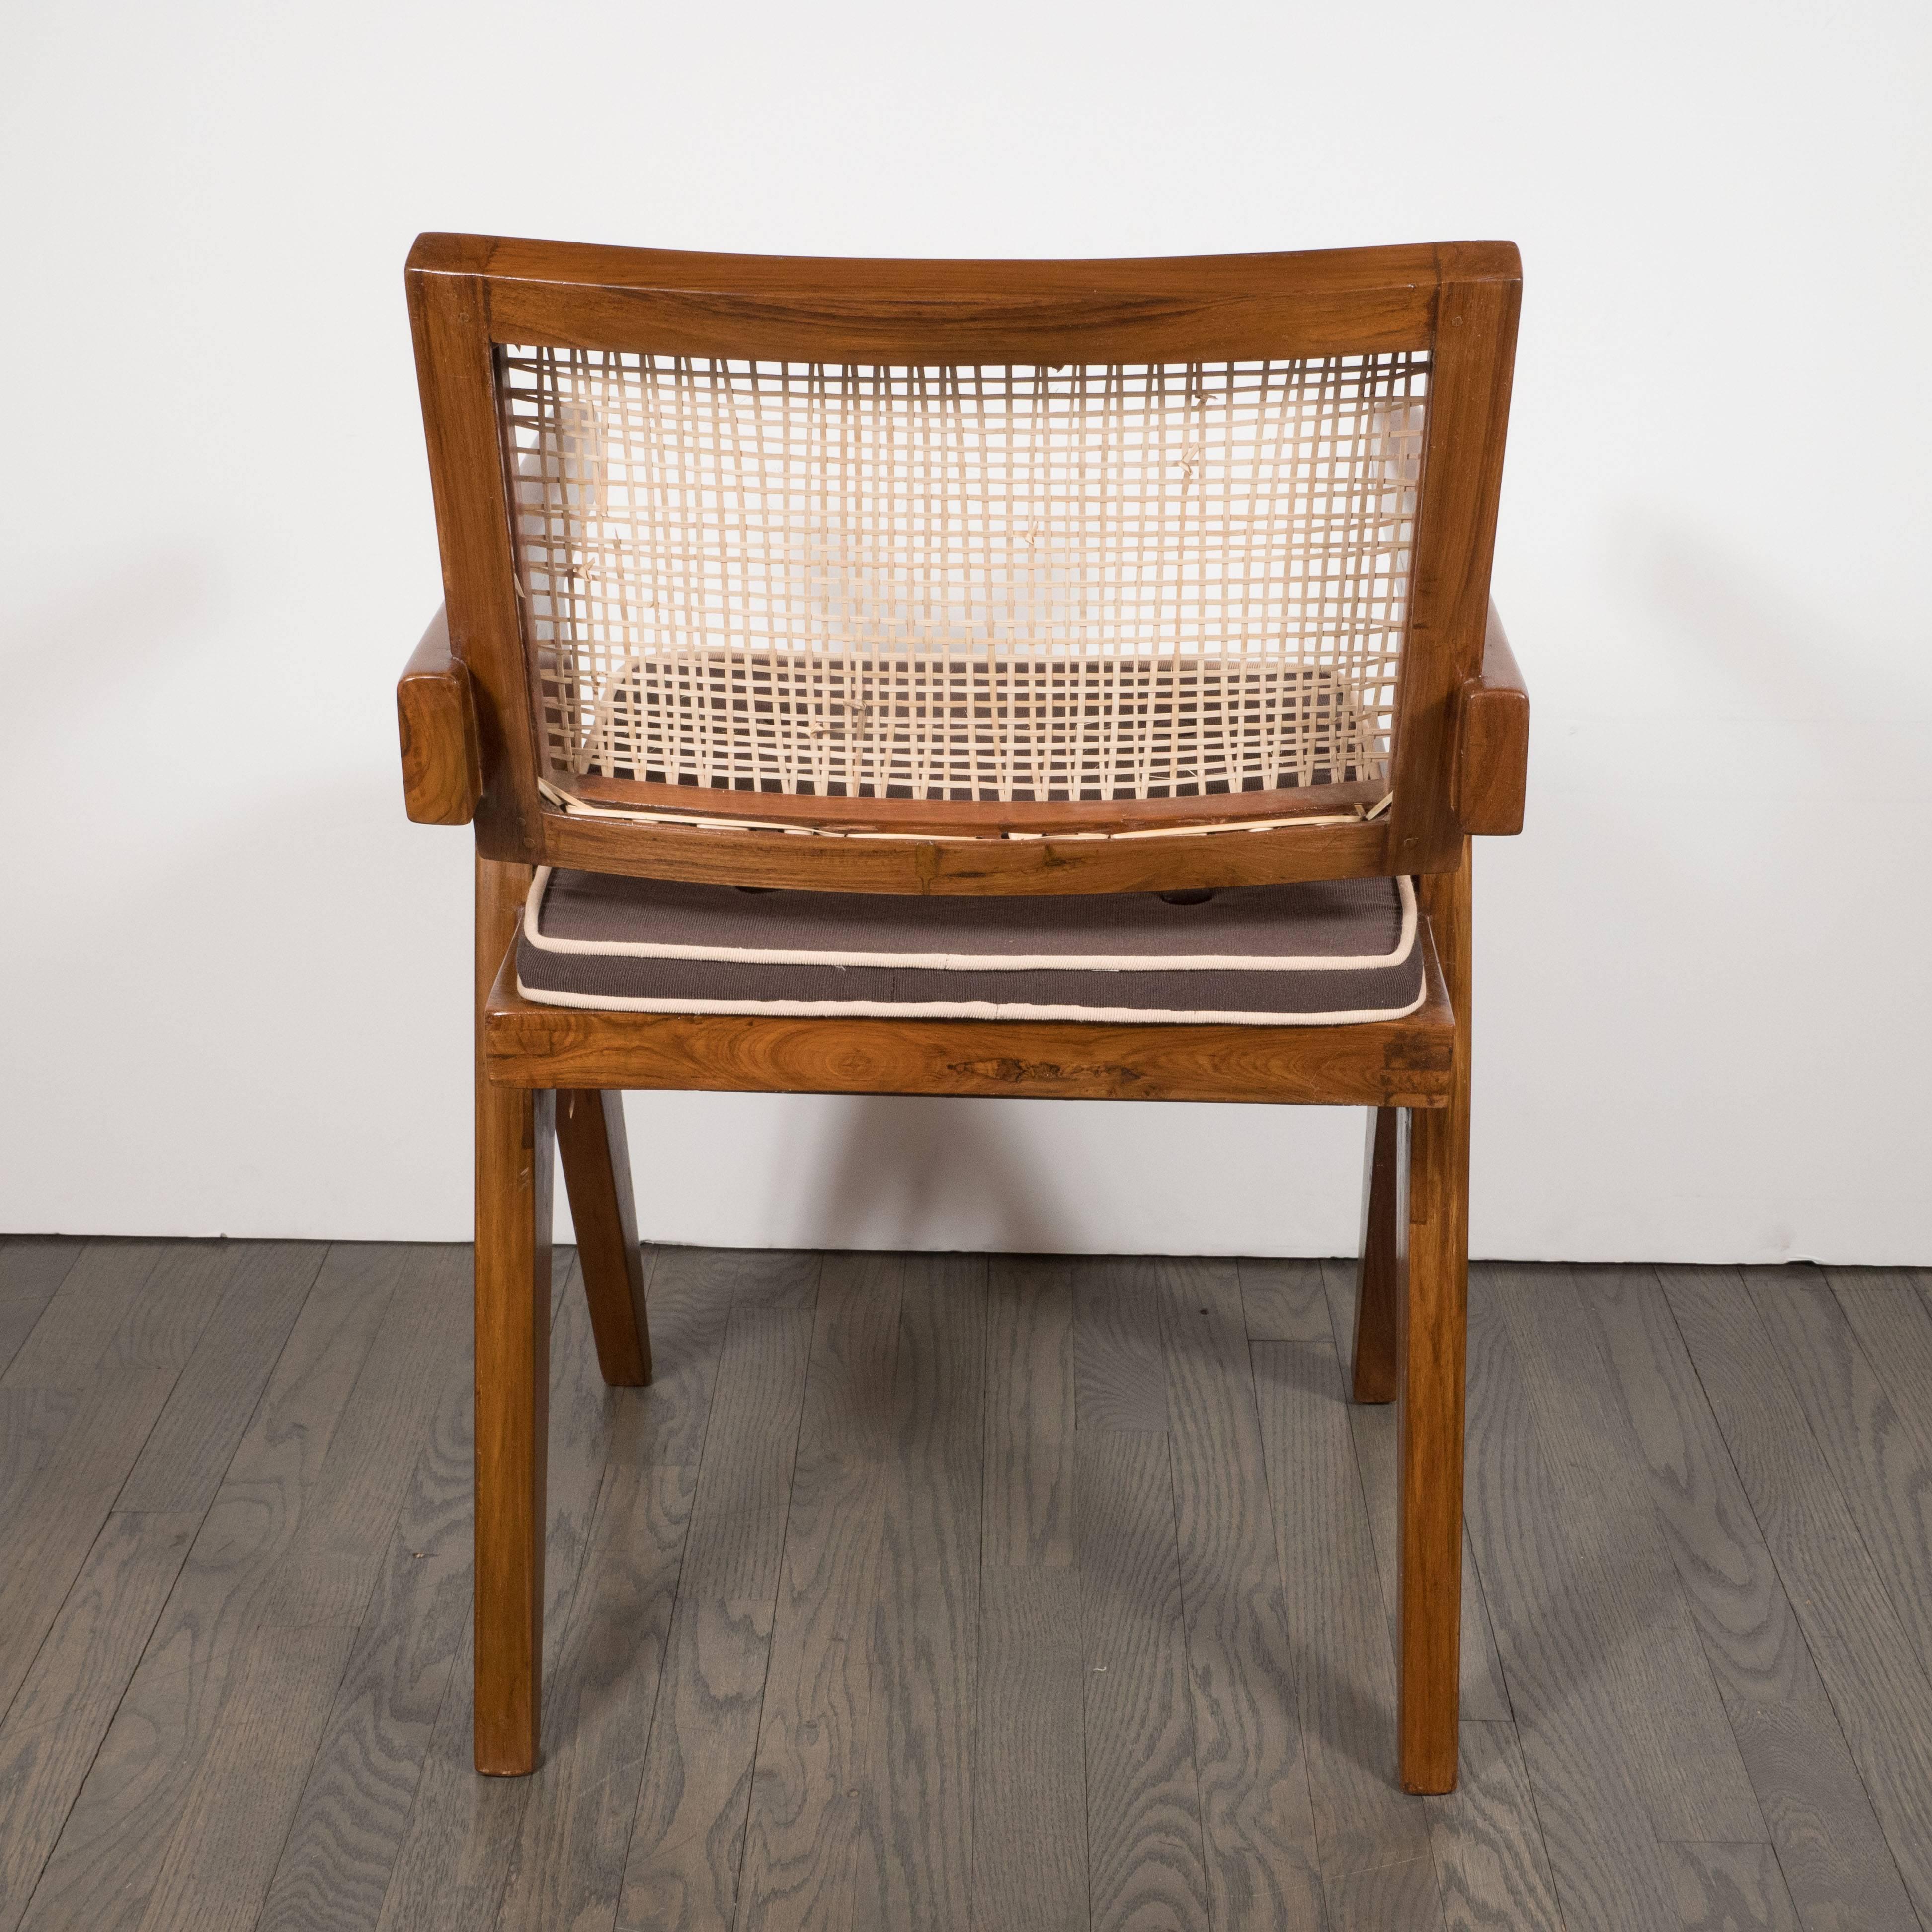 Mid-Century Modern Pair of Armchairs in Teak, Caning and Upholstery by Pierre Jeanneret